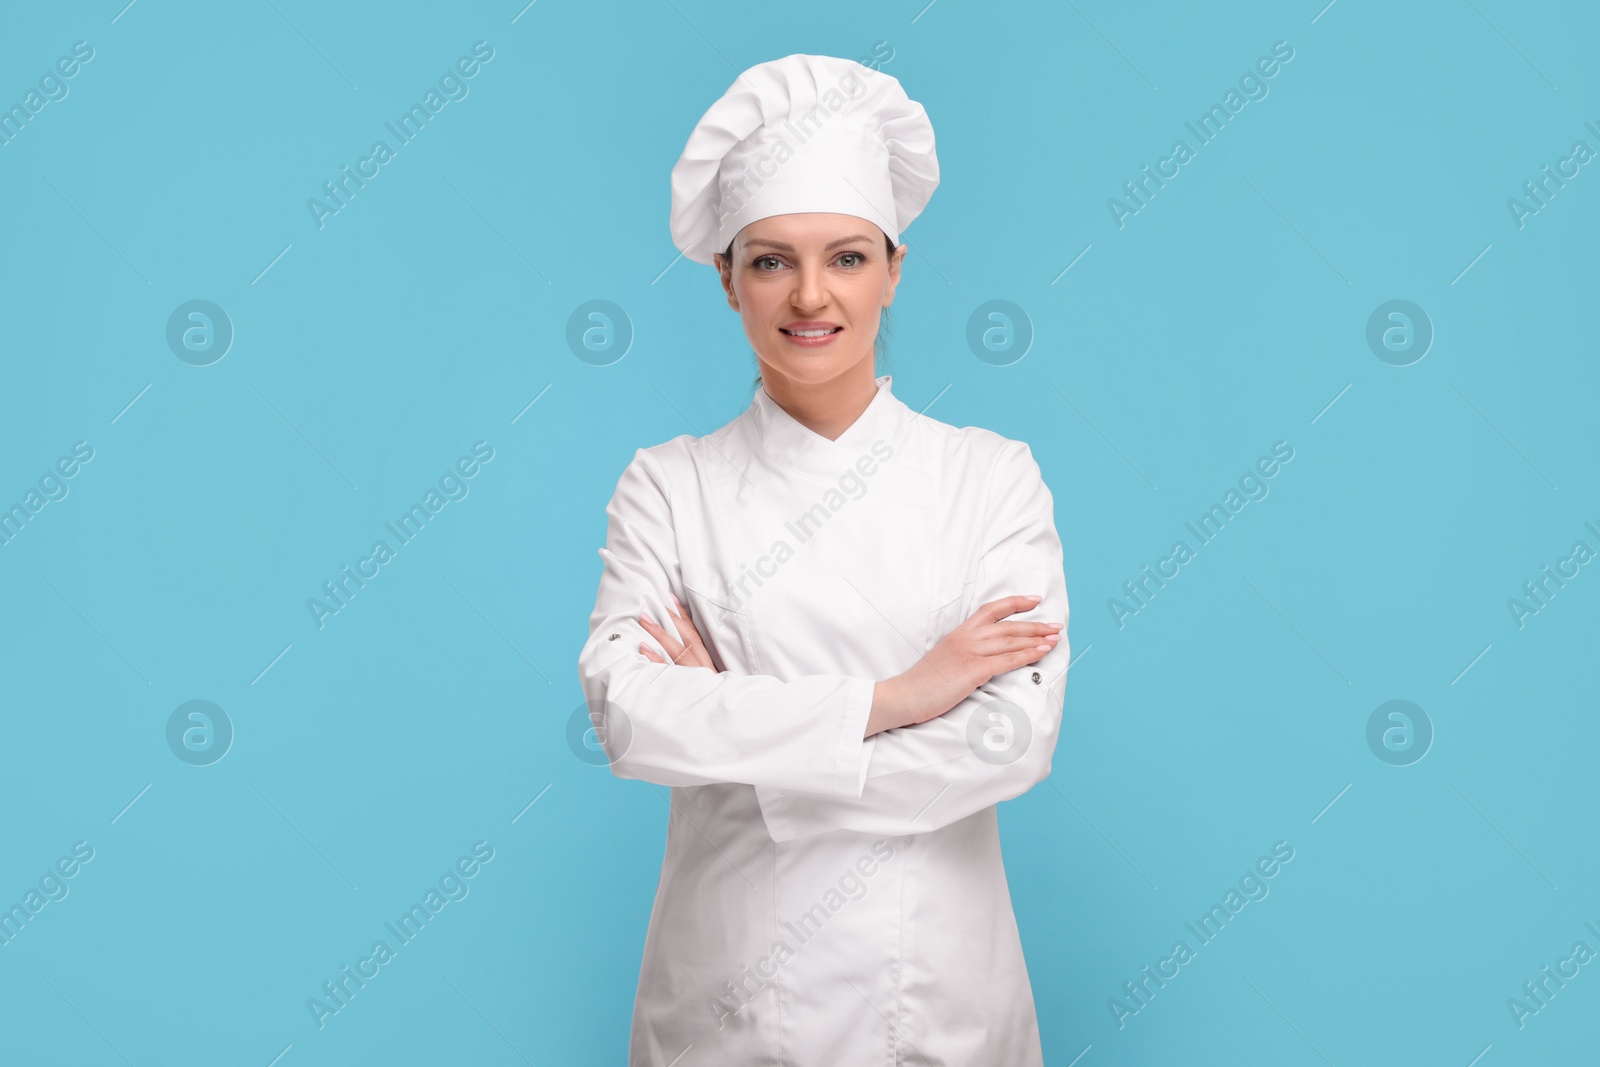 Photo of Happy chef in uniform on light blue background